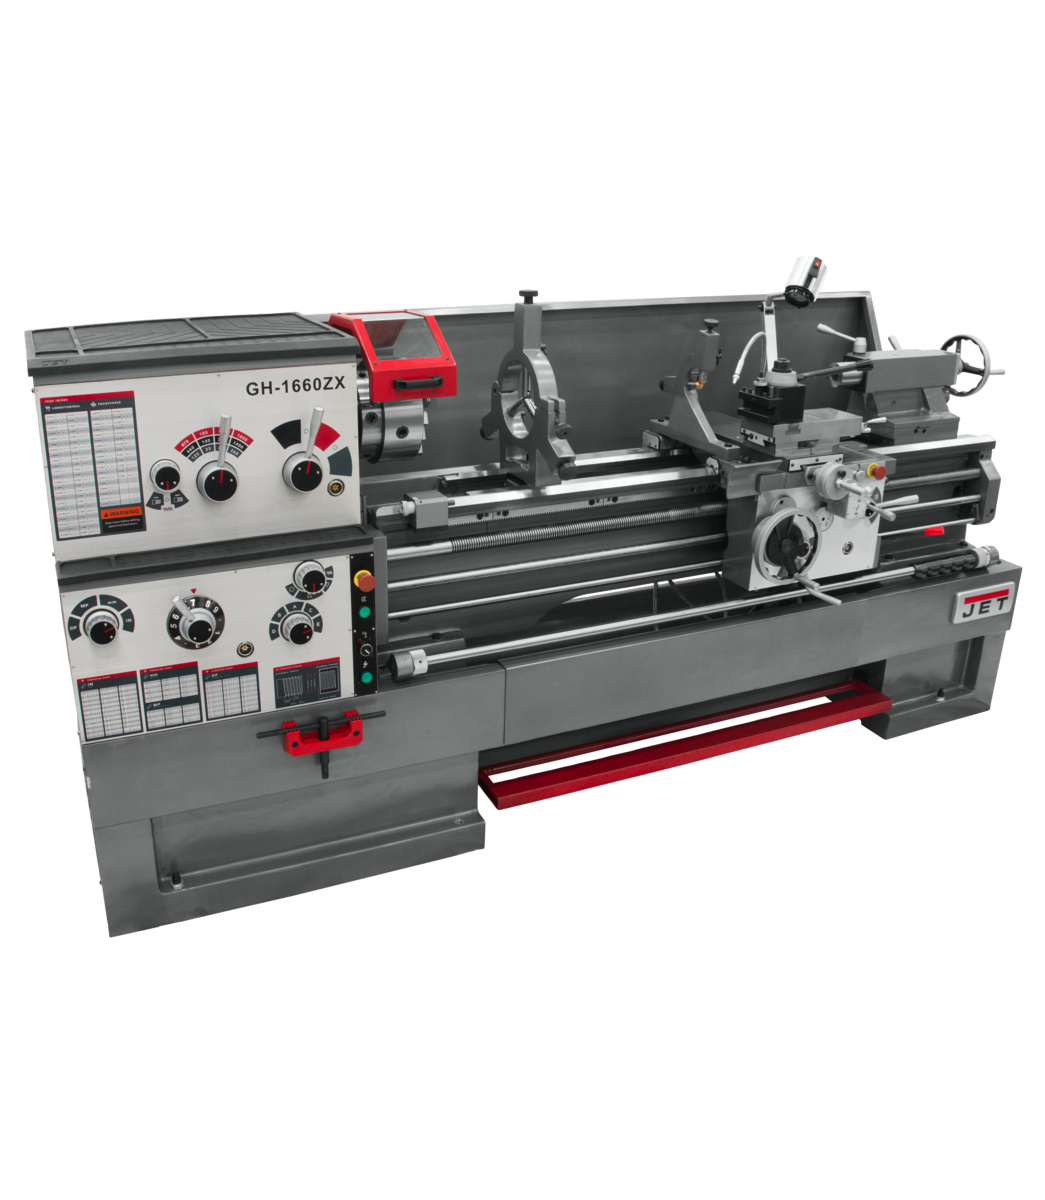 321455, GH-1660ZX Lathe with 2-axis ACU-RITE DRO 203 Installed, Jet, Metalworking, Turning, Lathes